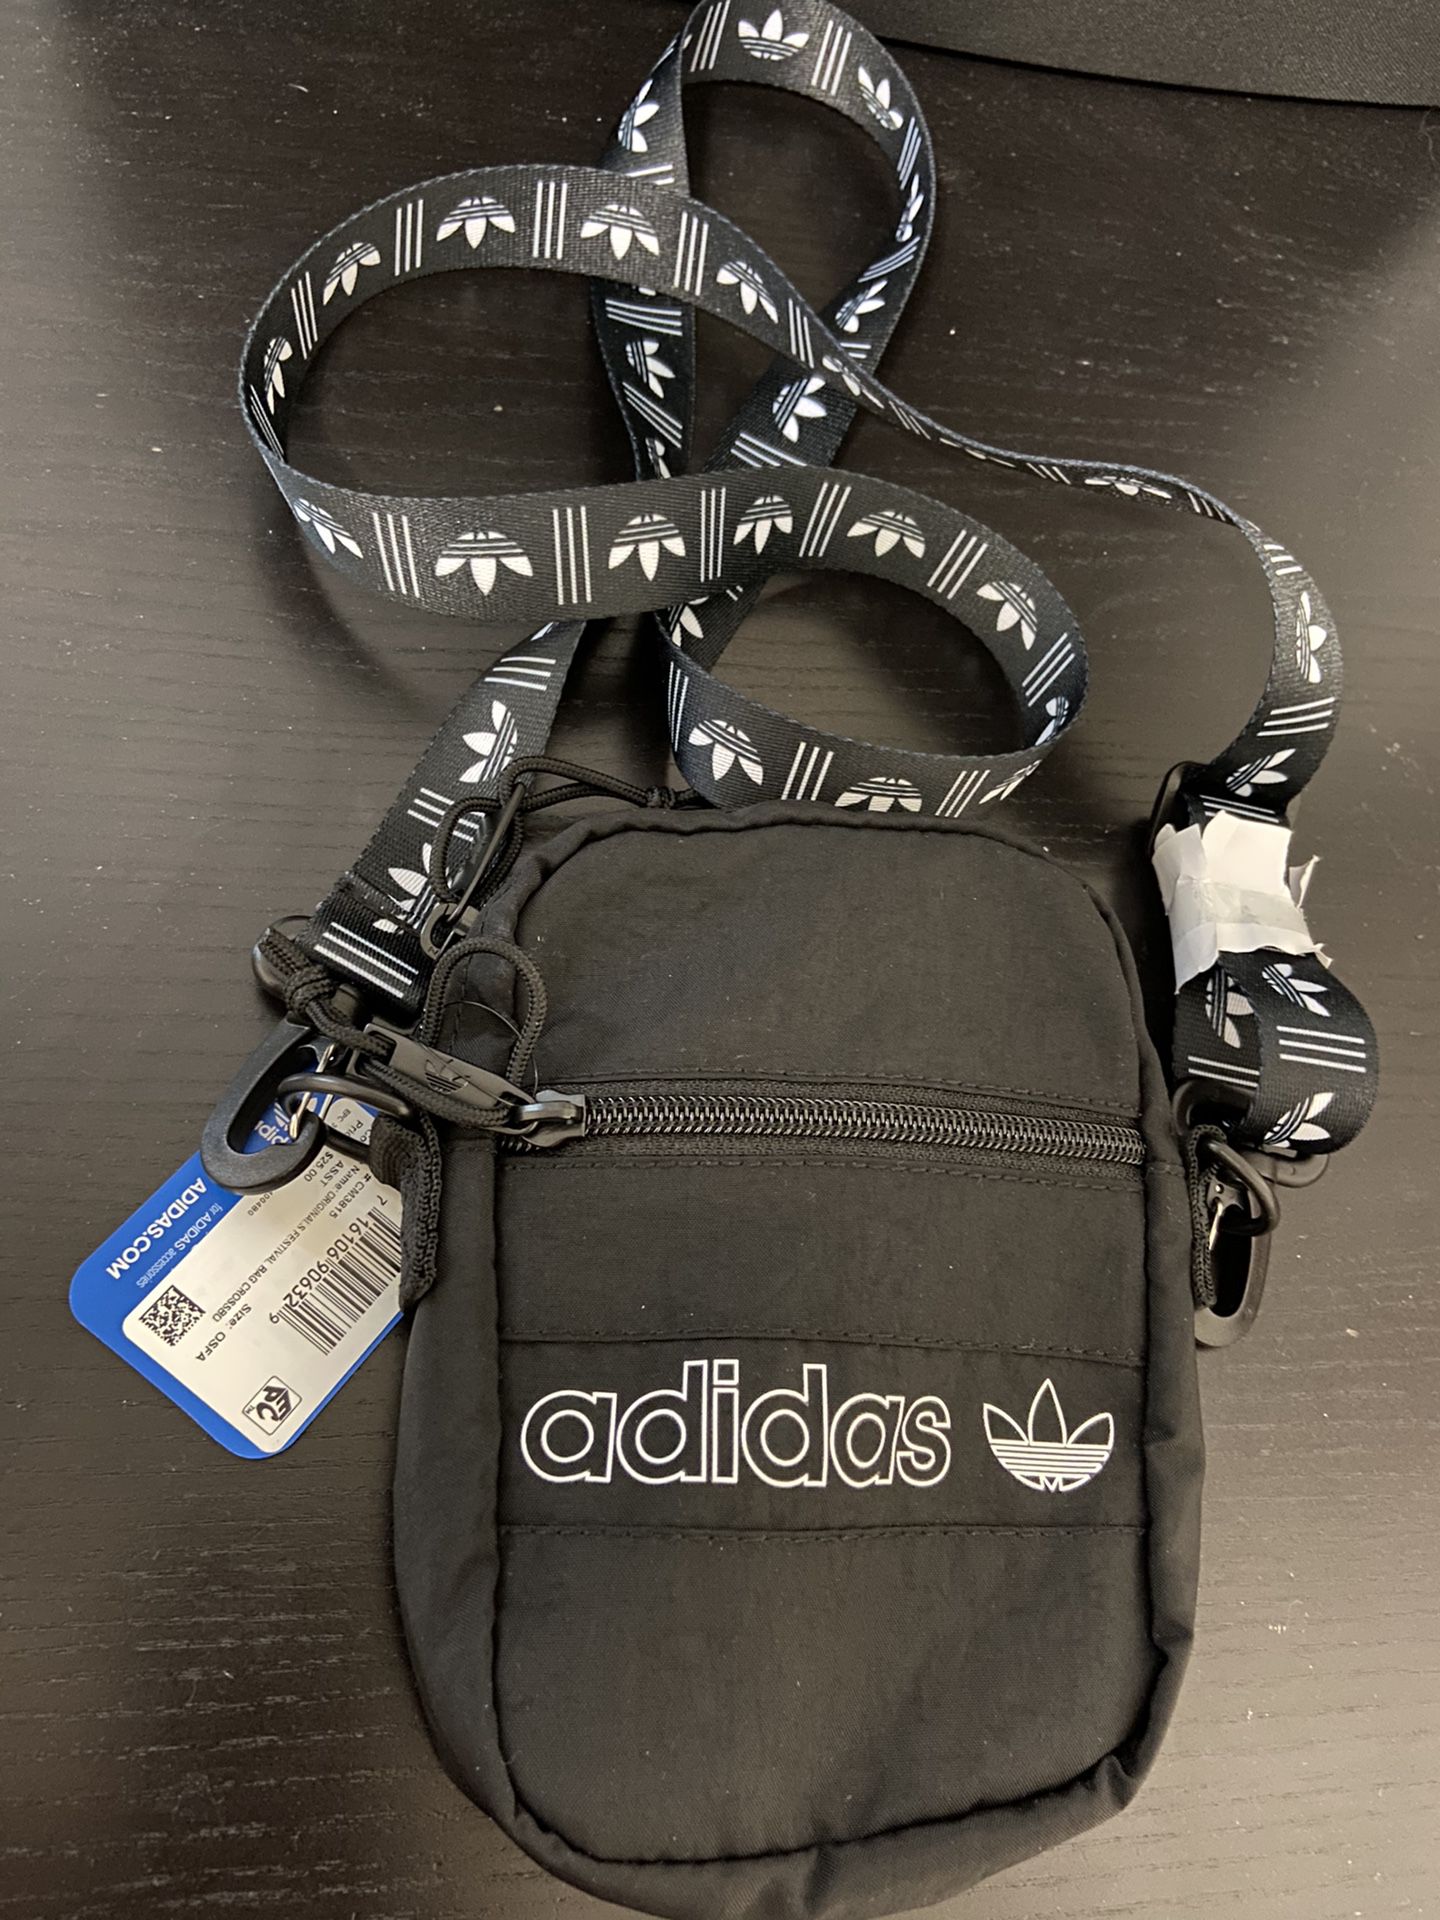 Free Adidas cross body bag with shoes purchase.